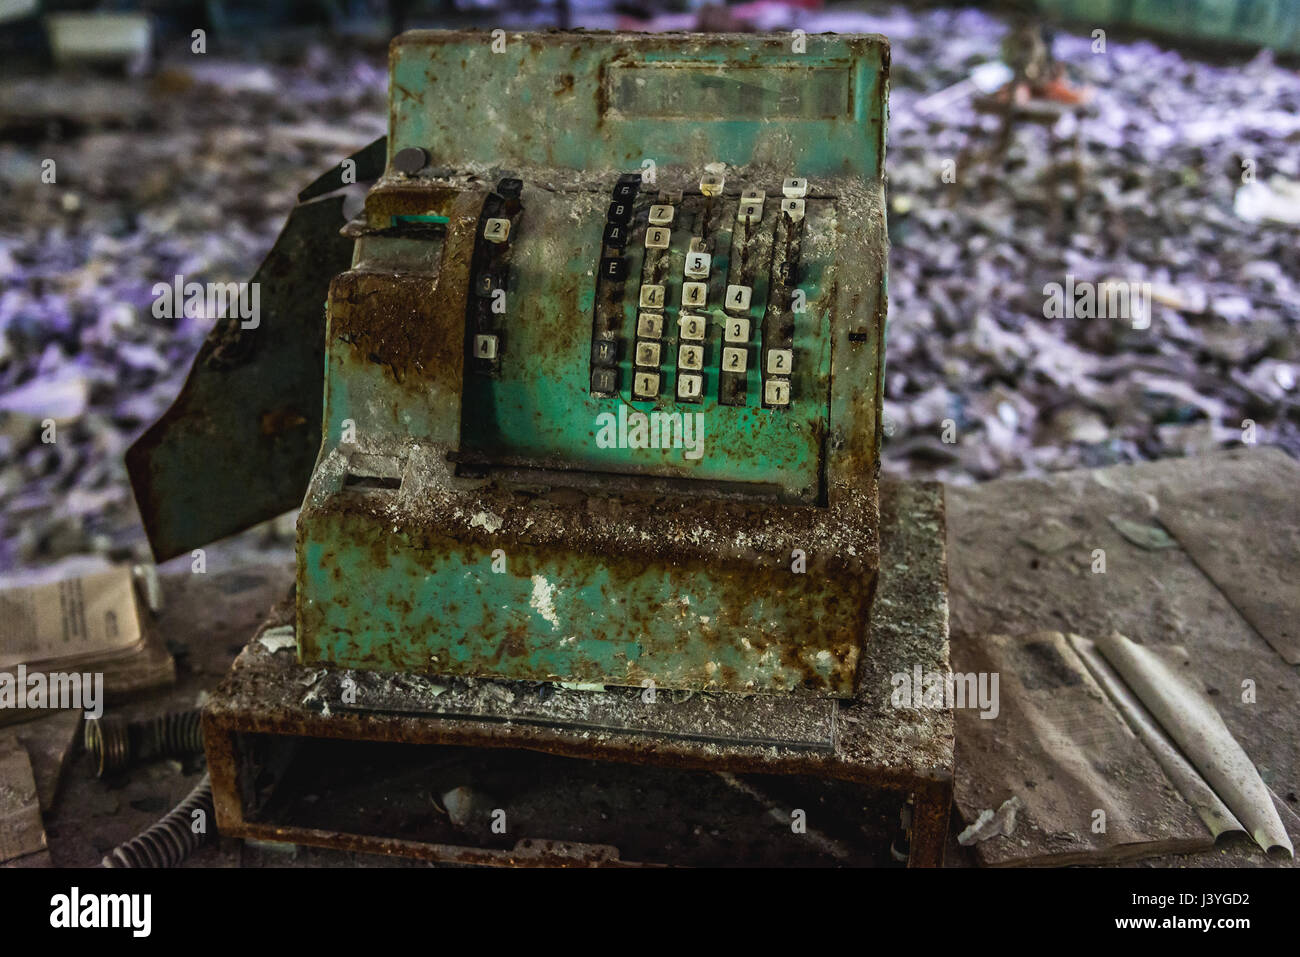 Old cash register in High school No 3 in Pripyat ghost city of Chernobyl Nuclear Power Plant Zone of Alienation in Ukraine Stock Photo